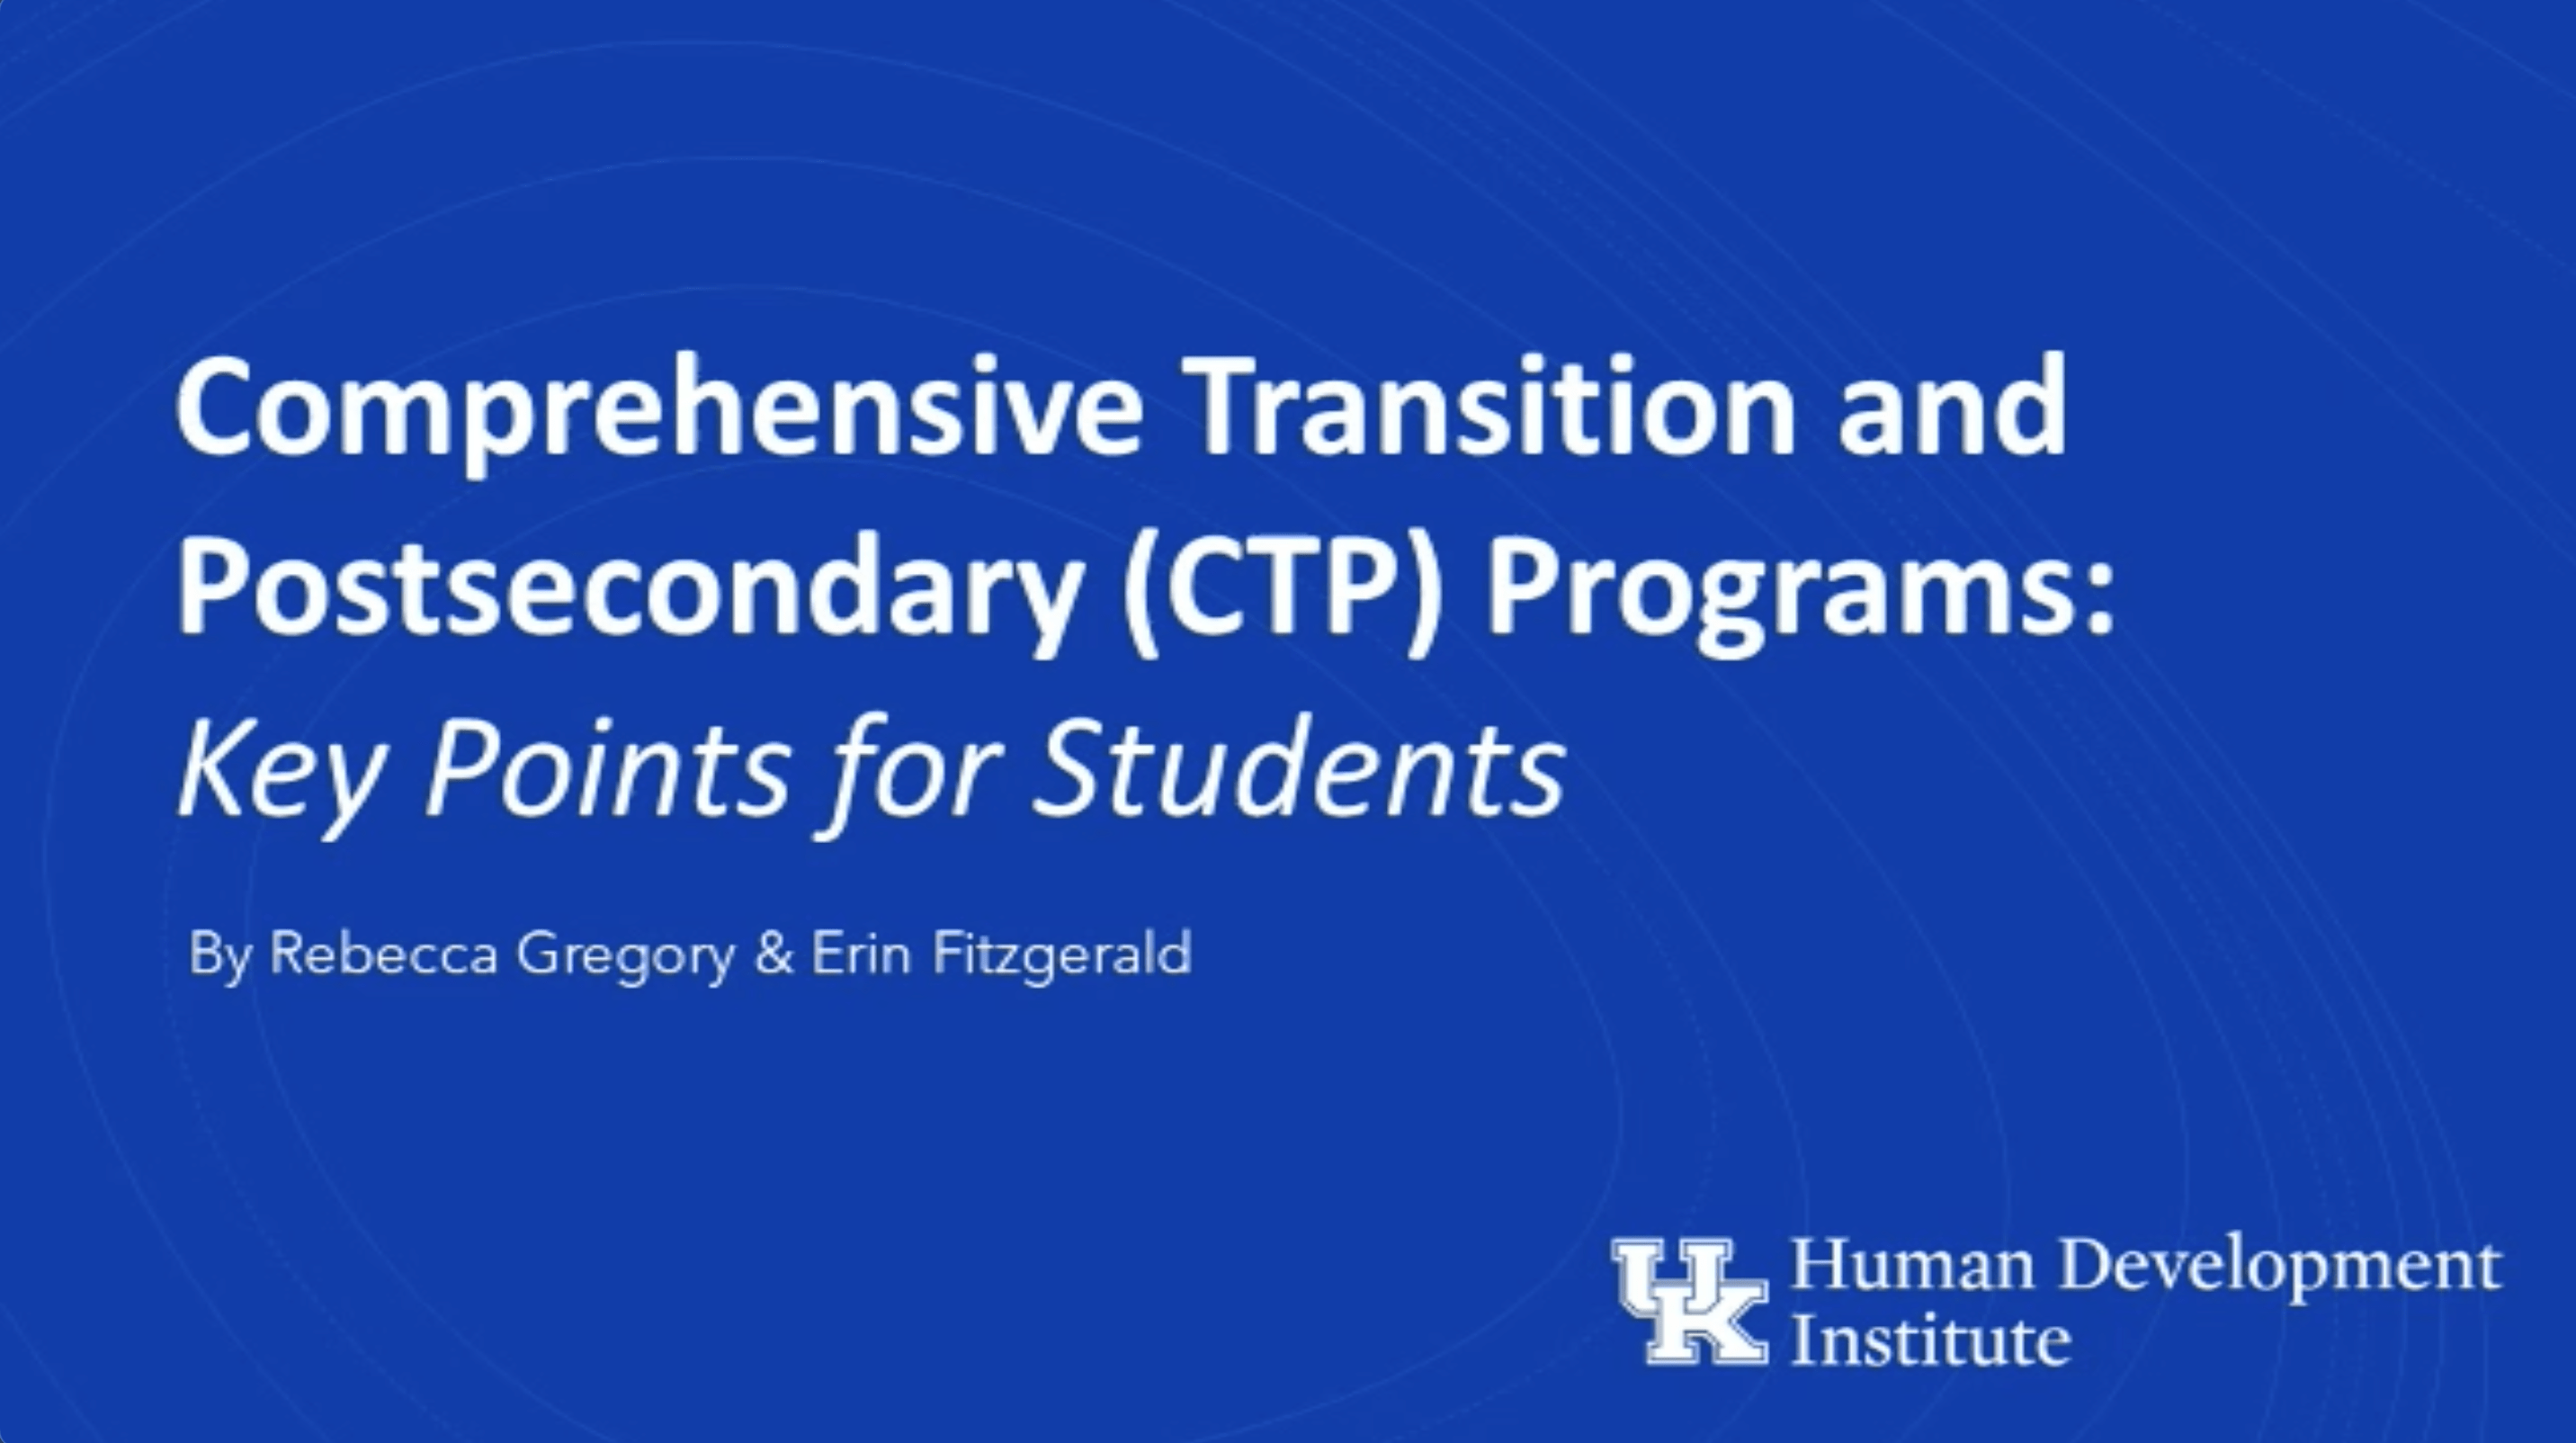 Comprehensive Transition and Postsecondary (CTP) Programs: Key Points for Students